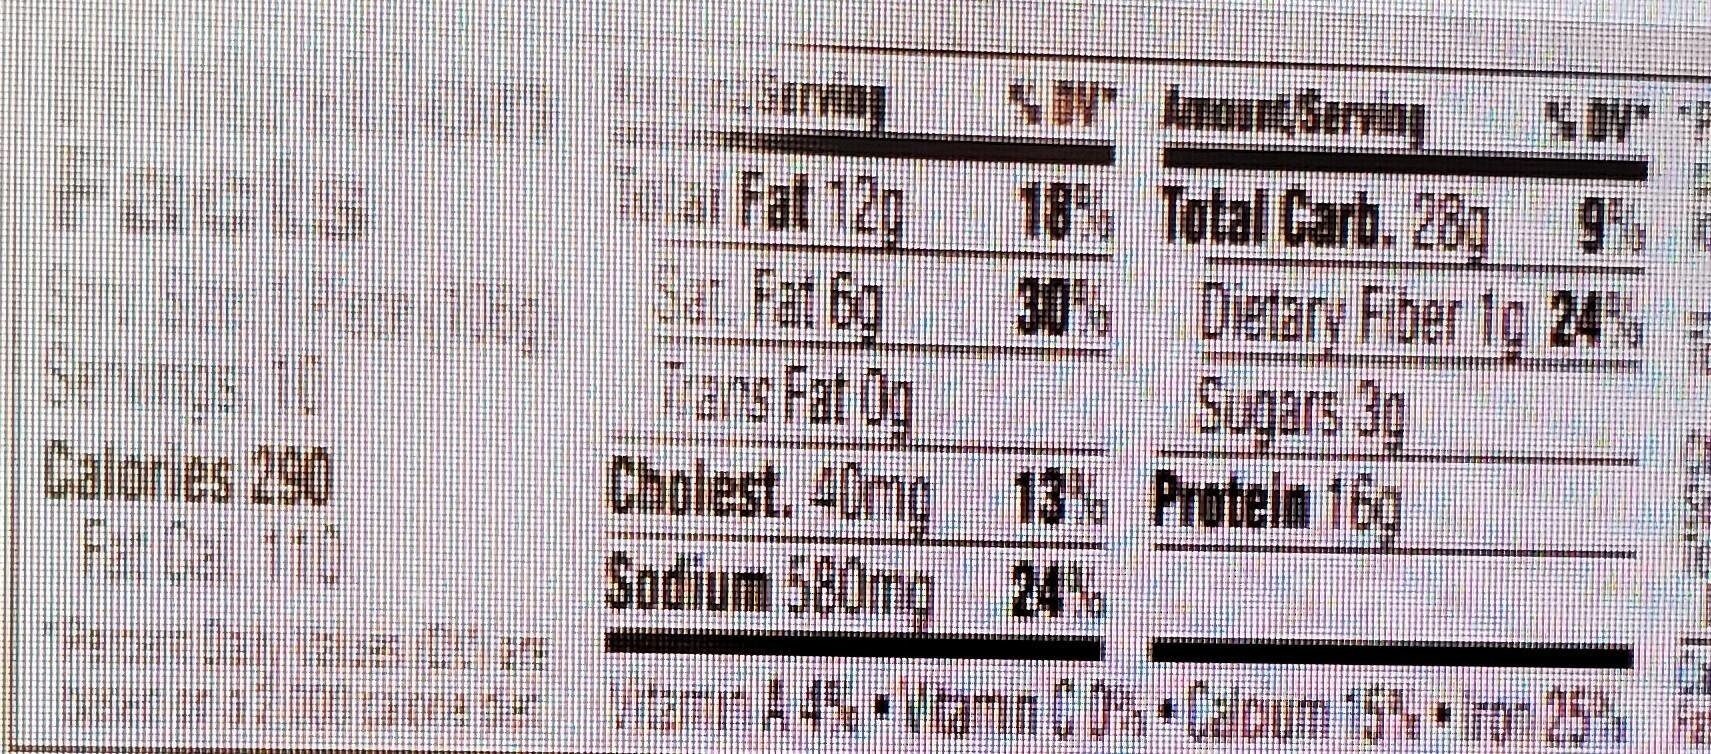 Steak & Cheese - Nutrition facts